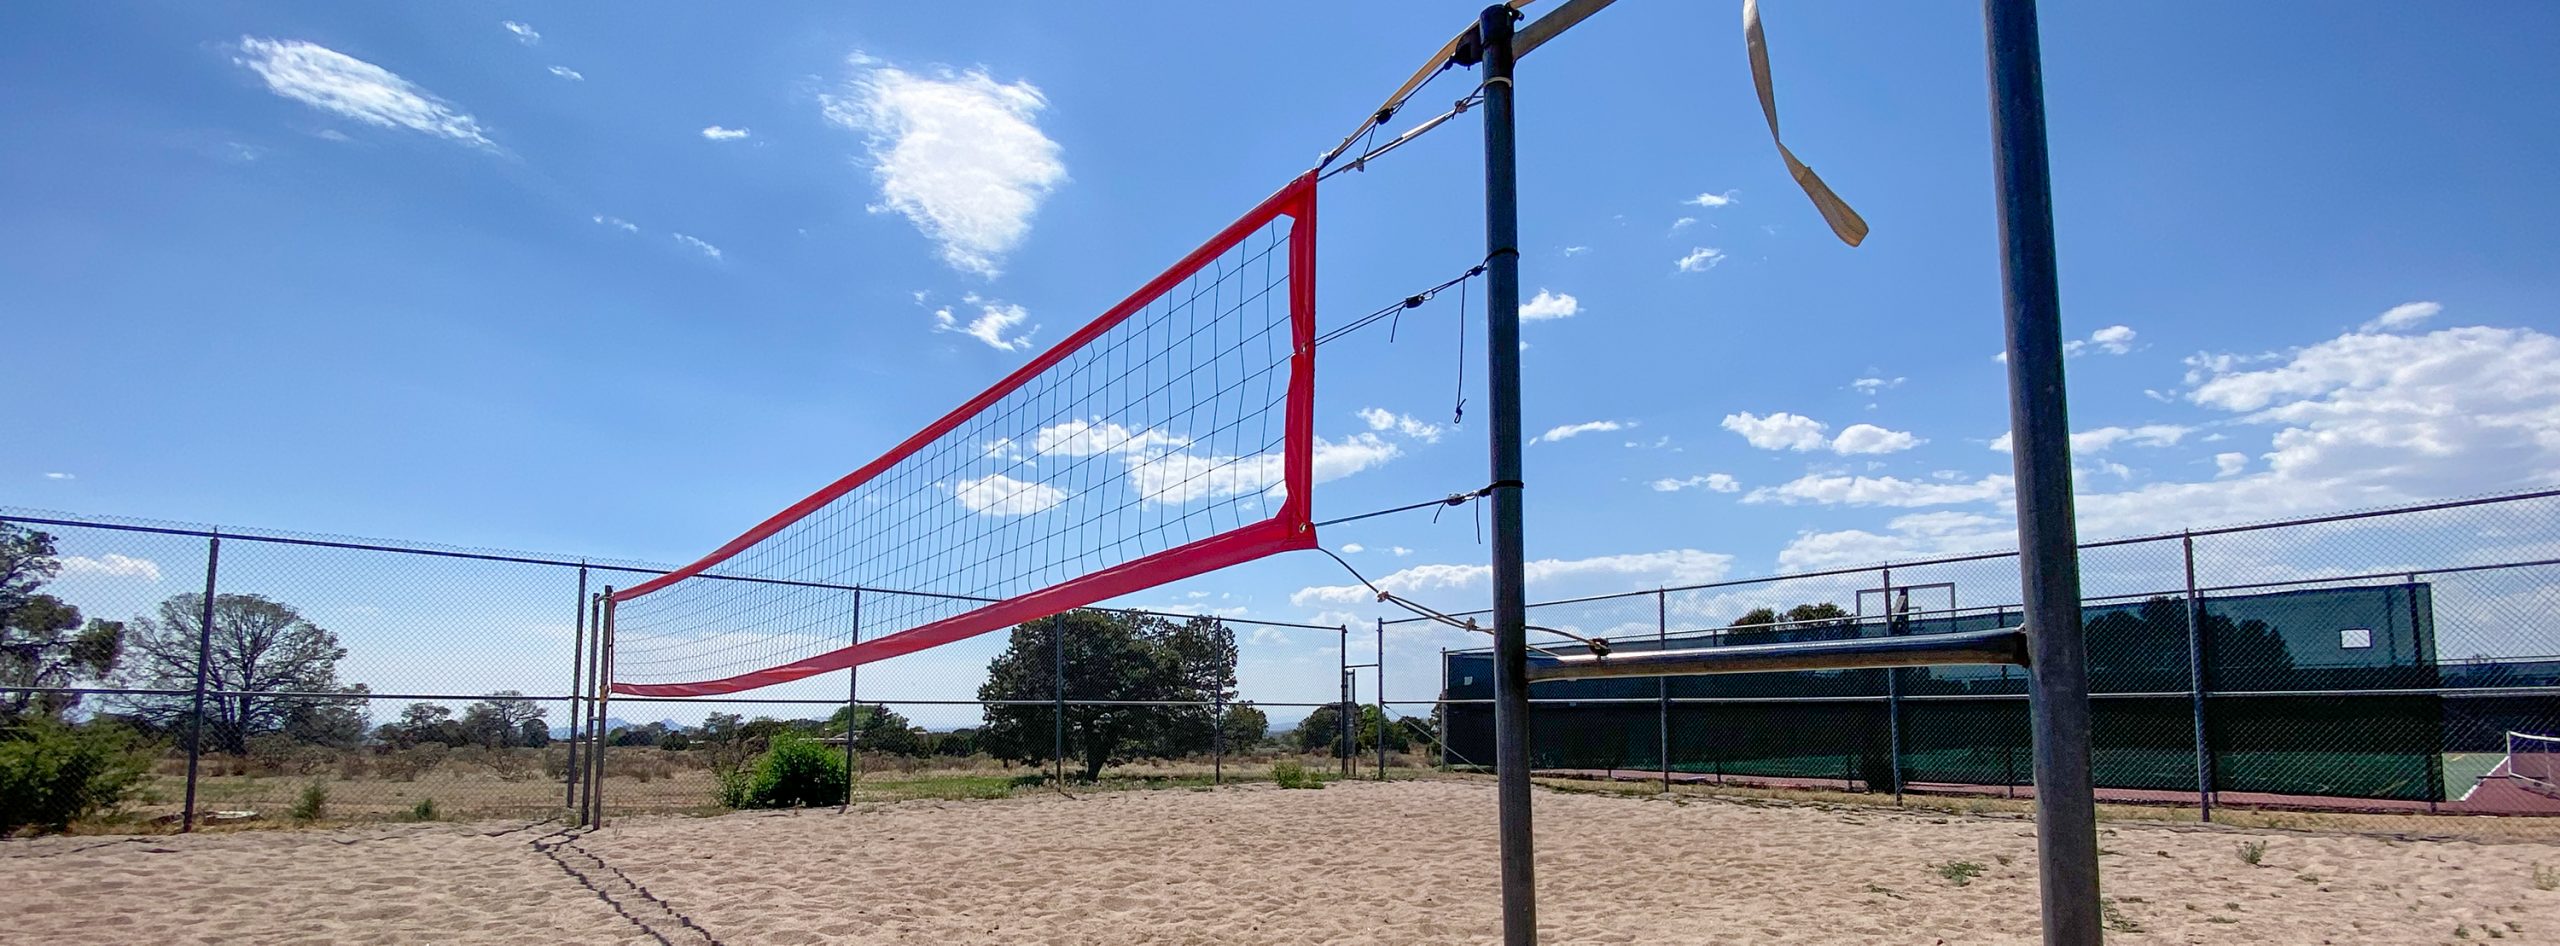 ECIA Volleyball Court